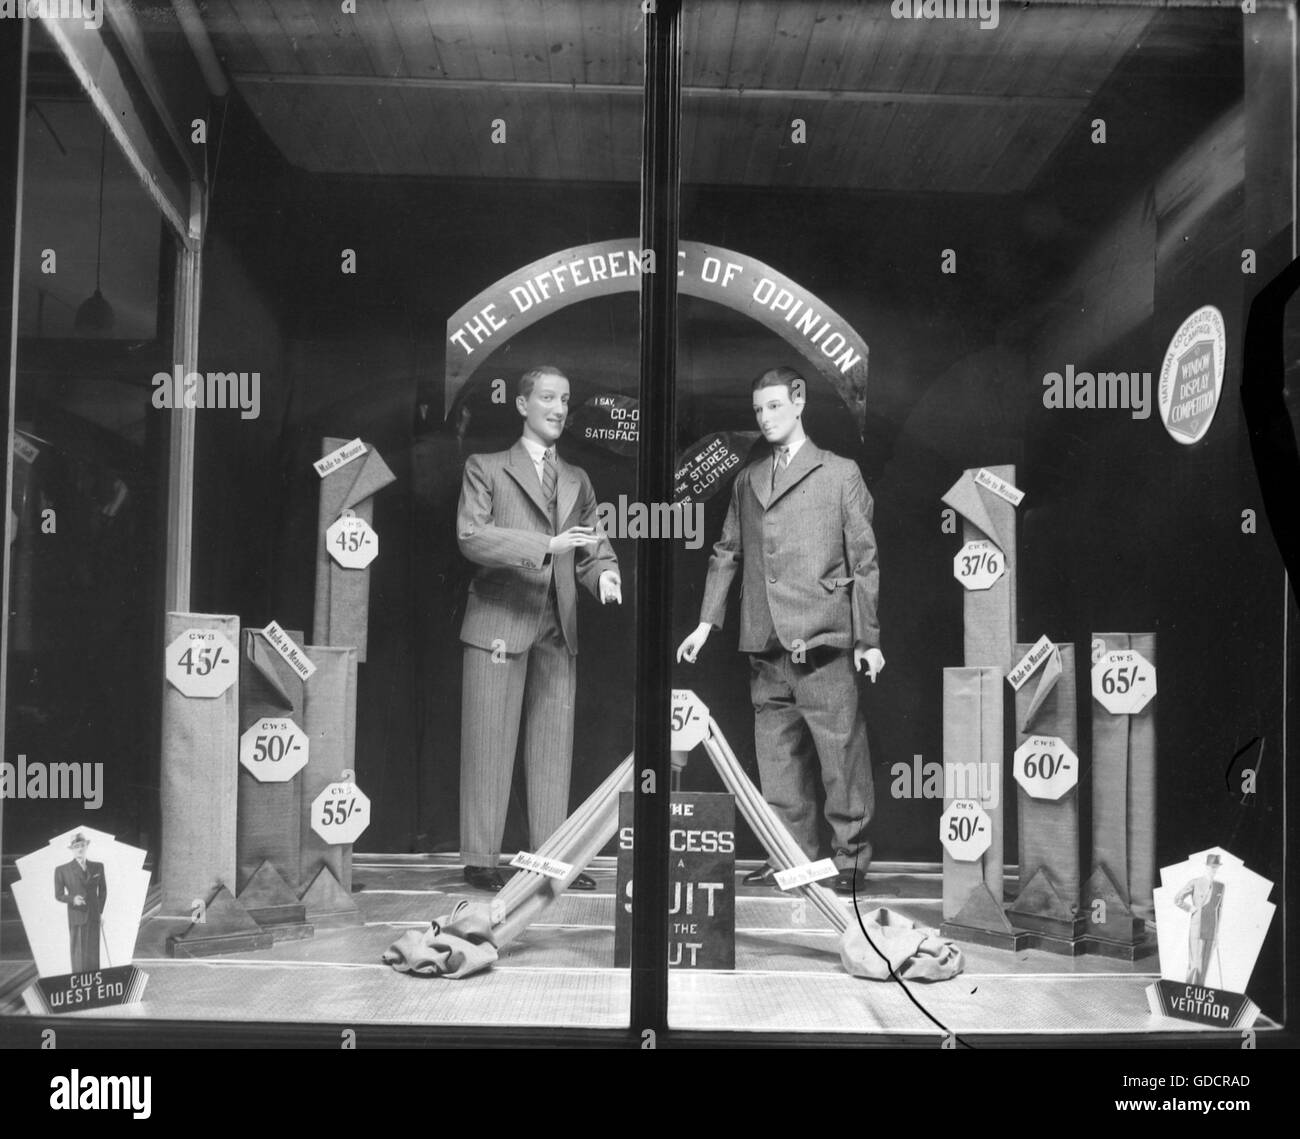 Made to measure suits in a Shop Window display for The Co-op Co-operative Wholesale Society (CWS) circa 1920 in the Burton on Trent area, South Derbyshire. Photograph by Tony Henshaw Stock Photo